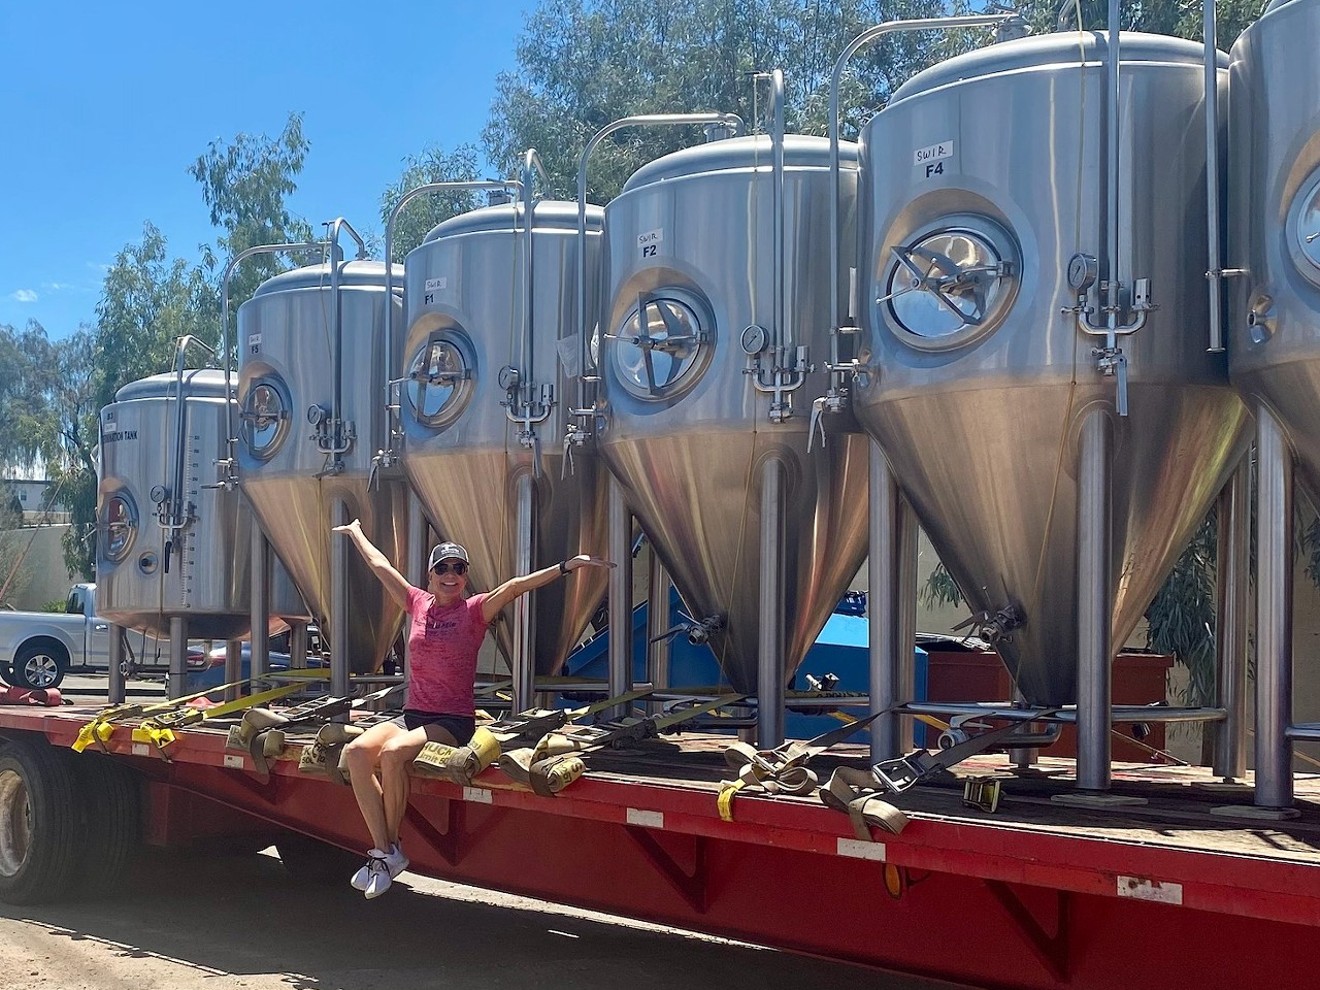 Hundred Mile Brewing Company owner Sue Rigler rejoices over the arrival of the tanks for her 10-barrel brewhouse. This weekend, she and her team will celebrate their grand opening.